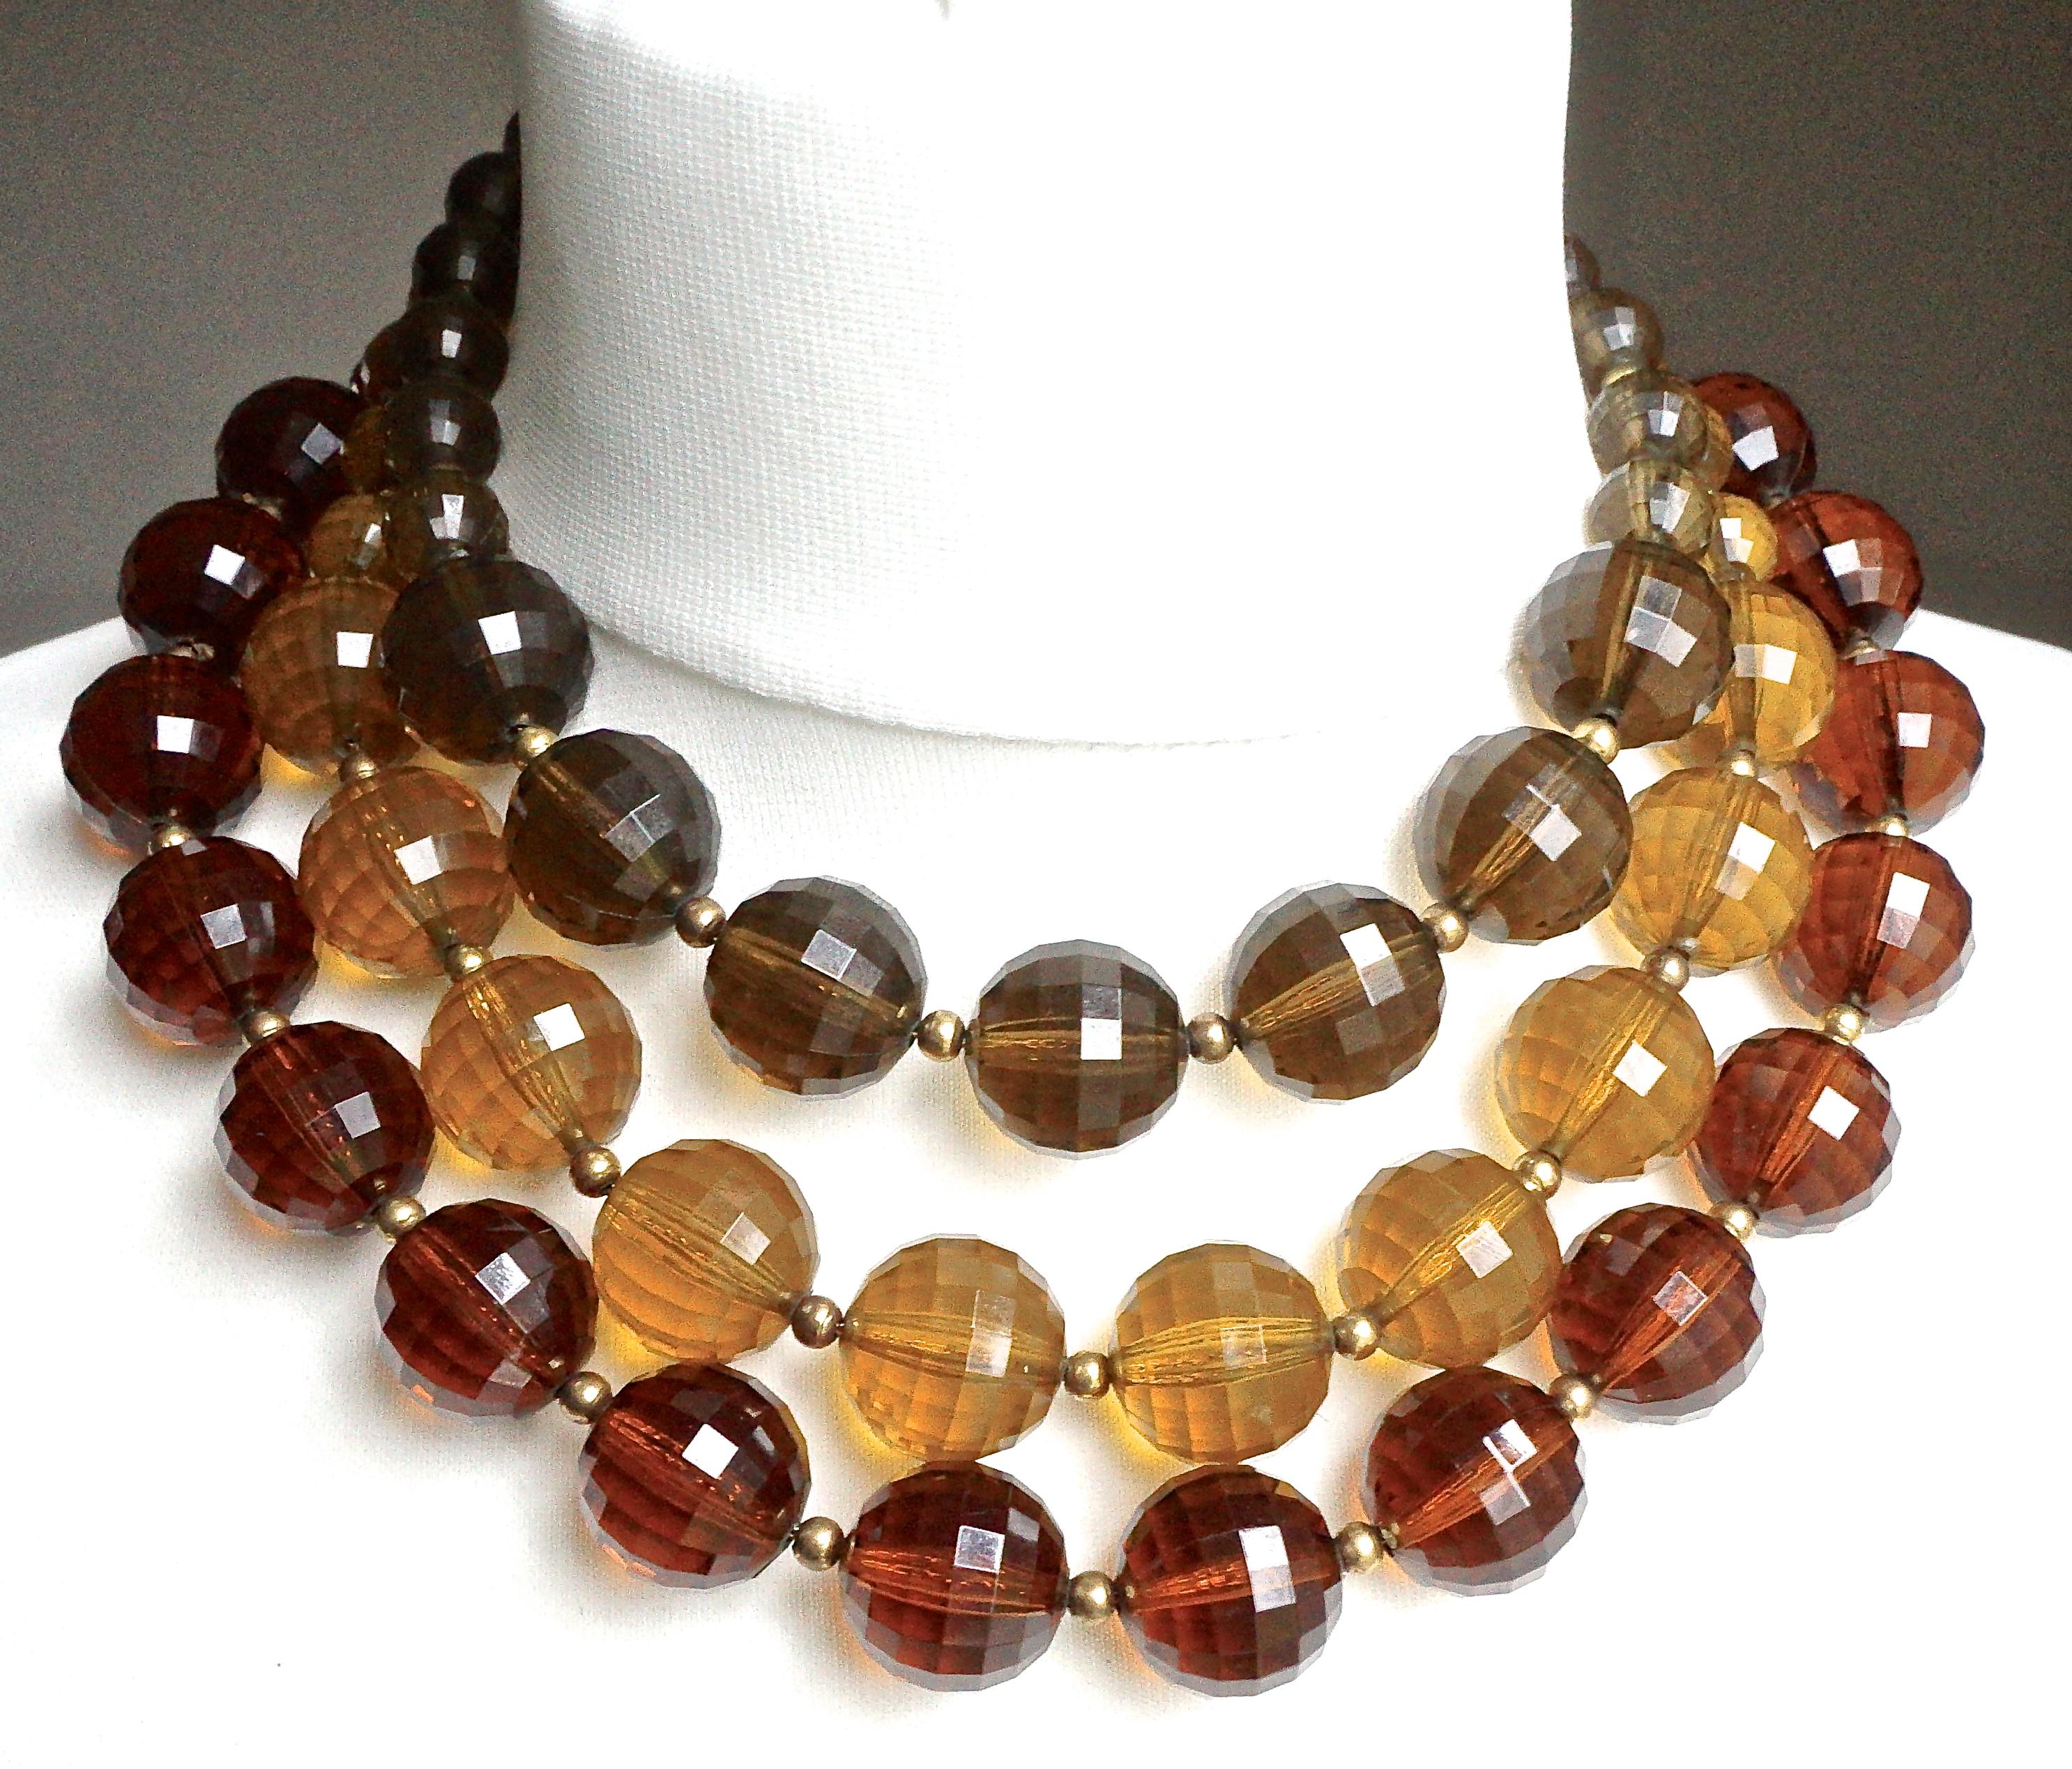 Gold plated necklace featuring three strands of faceted plastic beads in warm mid brown, golden, and olive. They are strung on chain, and there are small gold beads between each larger bead. The necklace has a large faceted glass clasp in a lovely